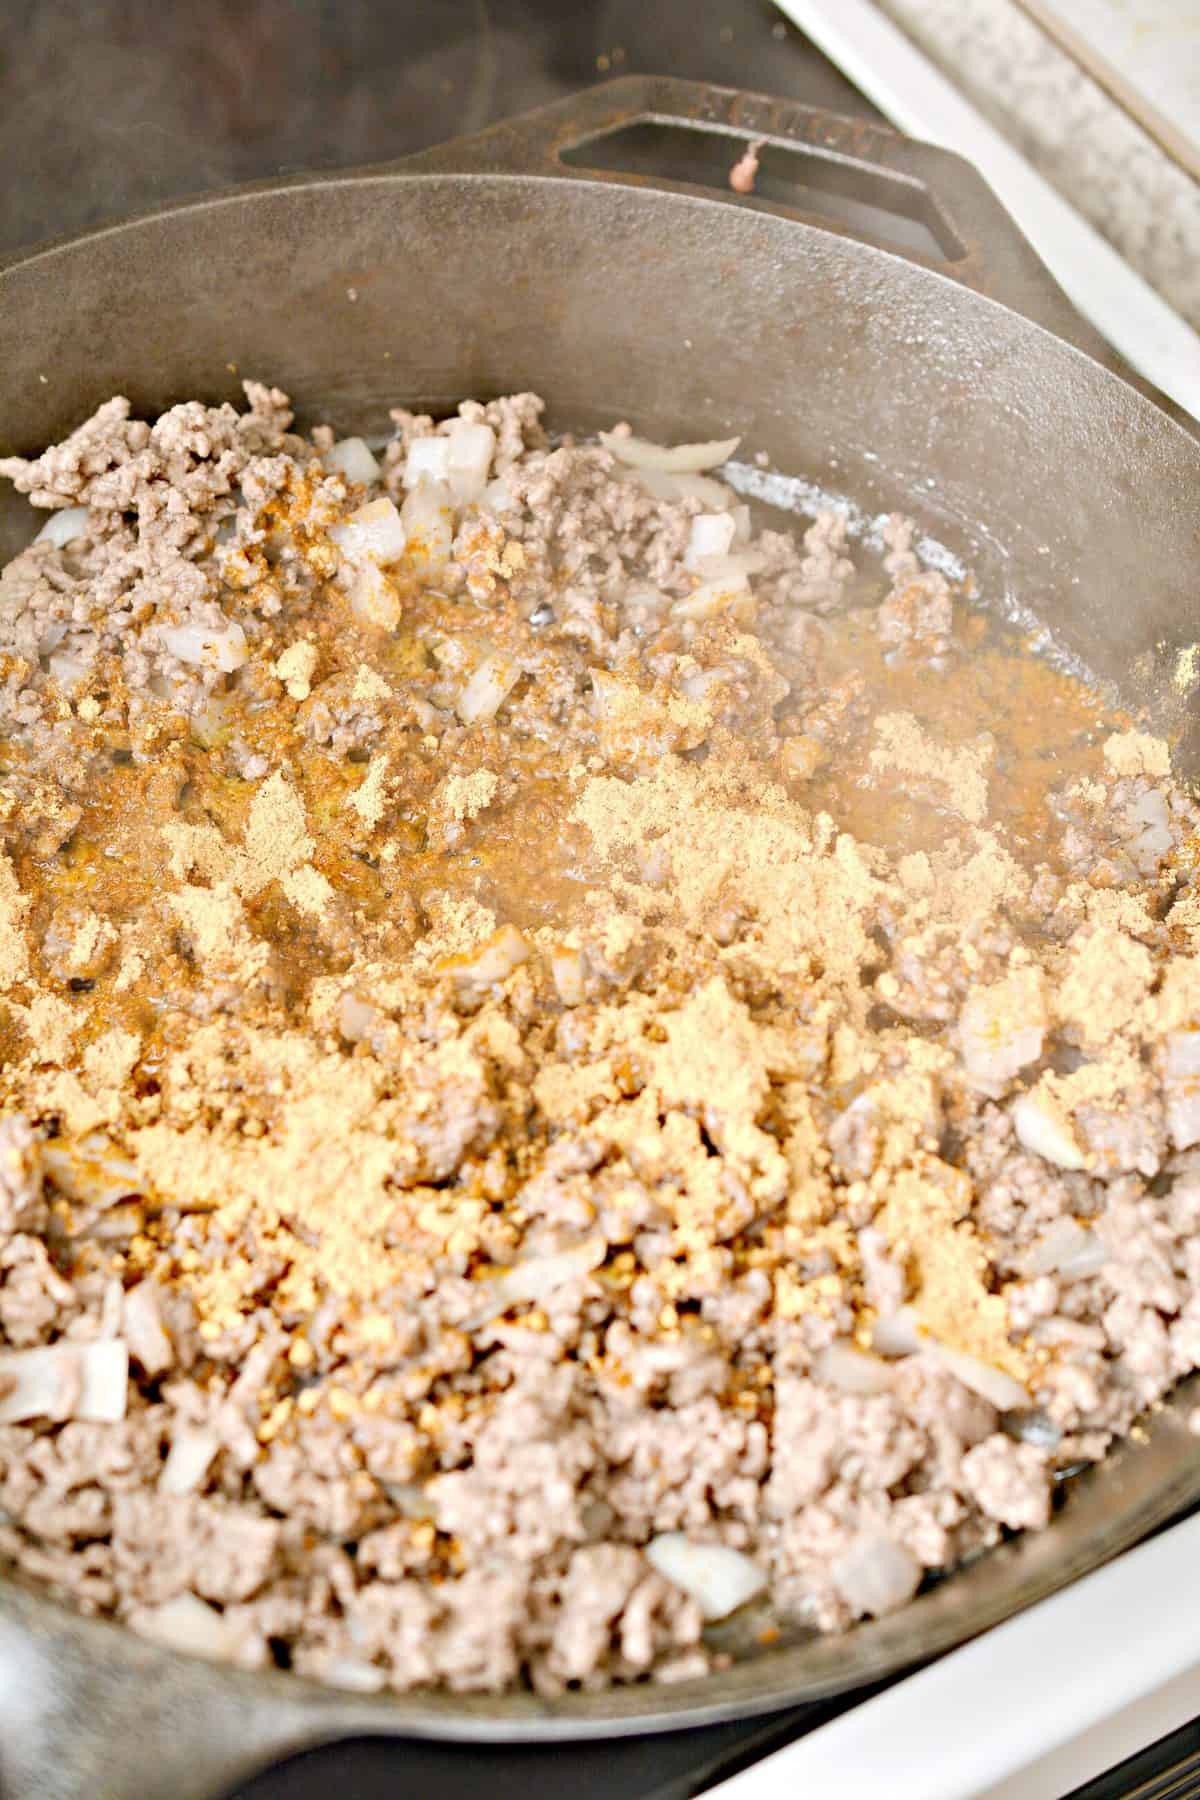 While the cornbread is baking, saute the meat and onions in a skillet over medium-high heat until the meat is browned, and the onions begin to soften.